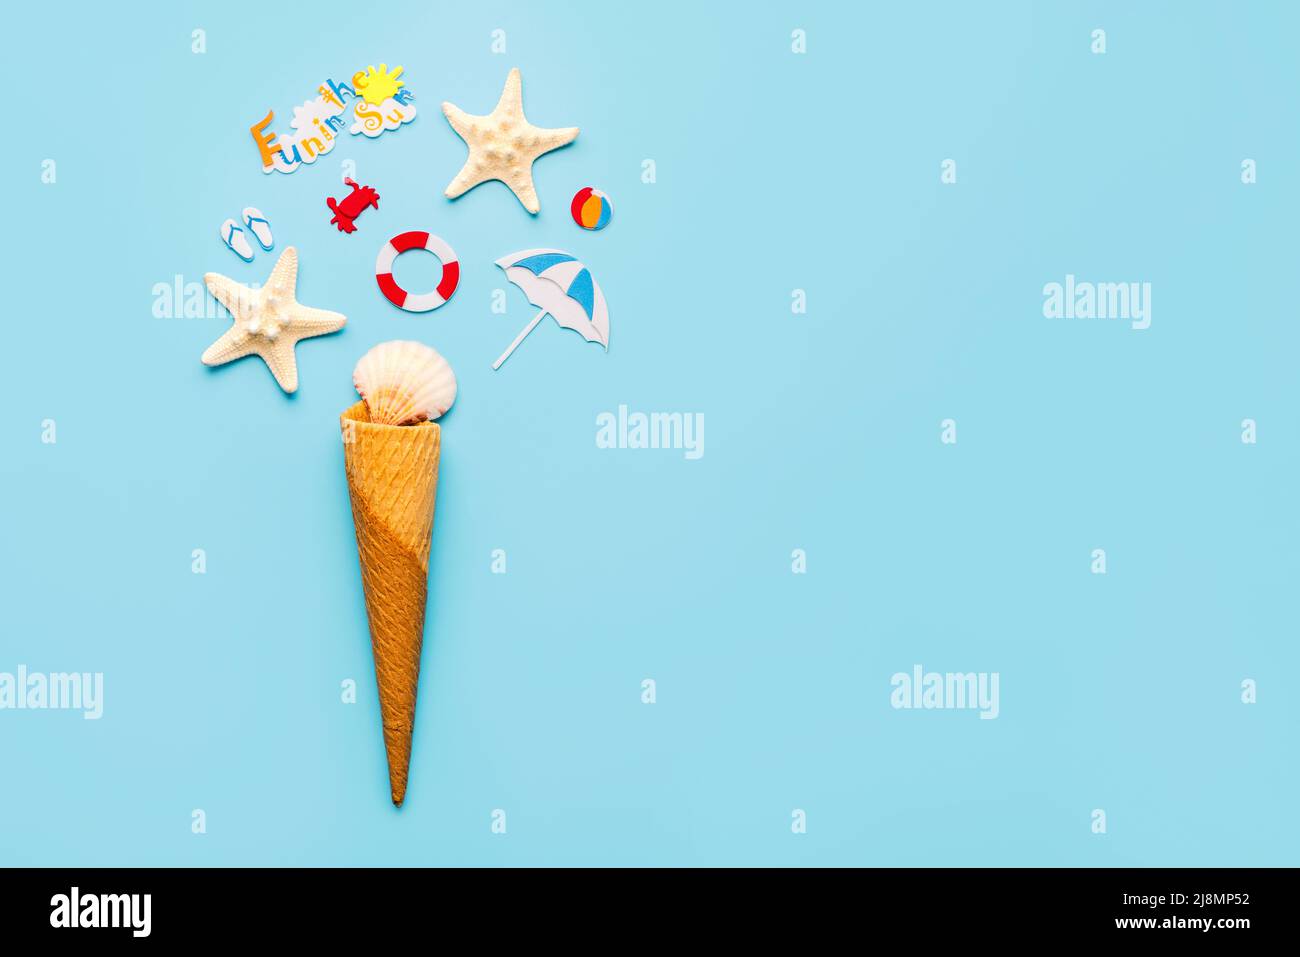 Ice cream cone with sea shells,starfish and beach drawings with space for text over blue background. Summer holiday concept Stock Photo